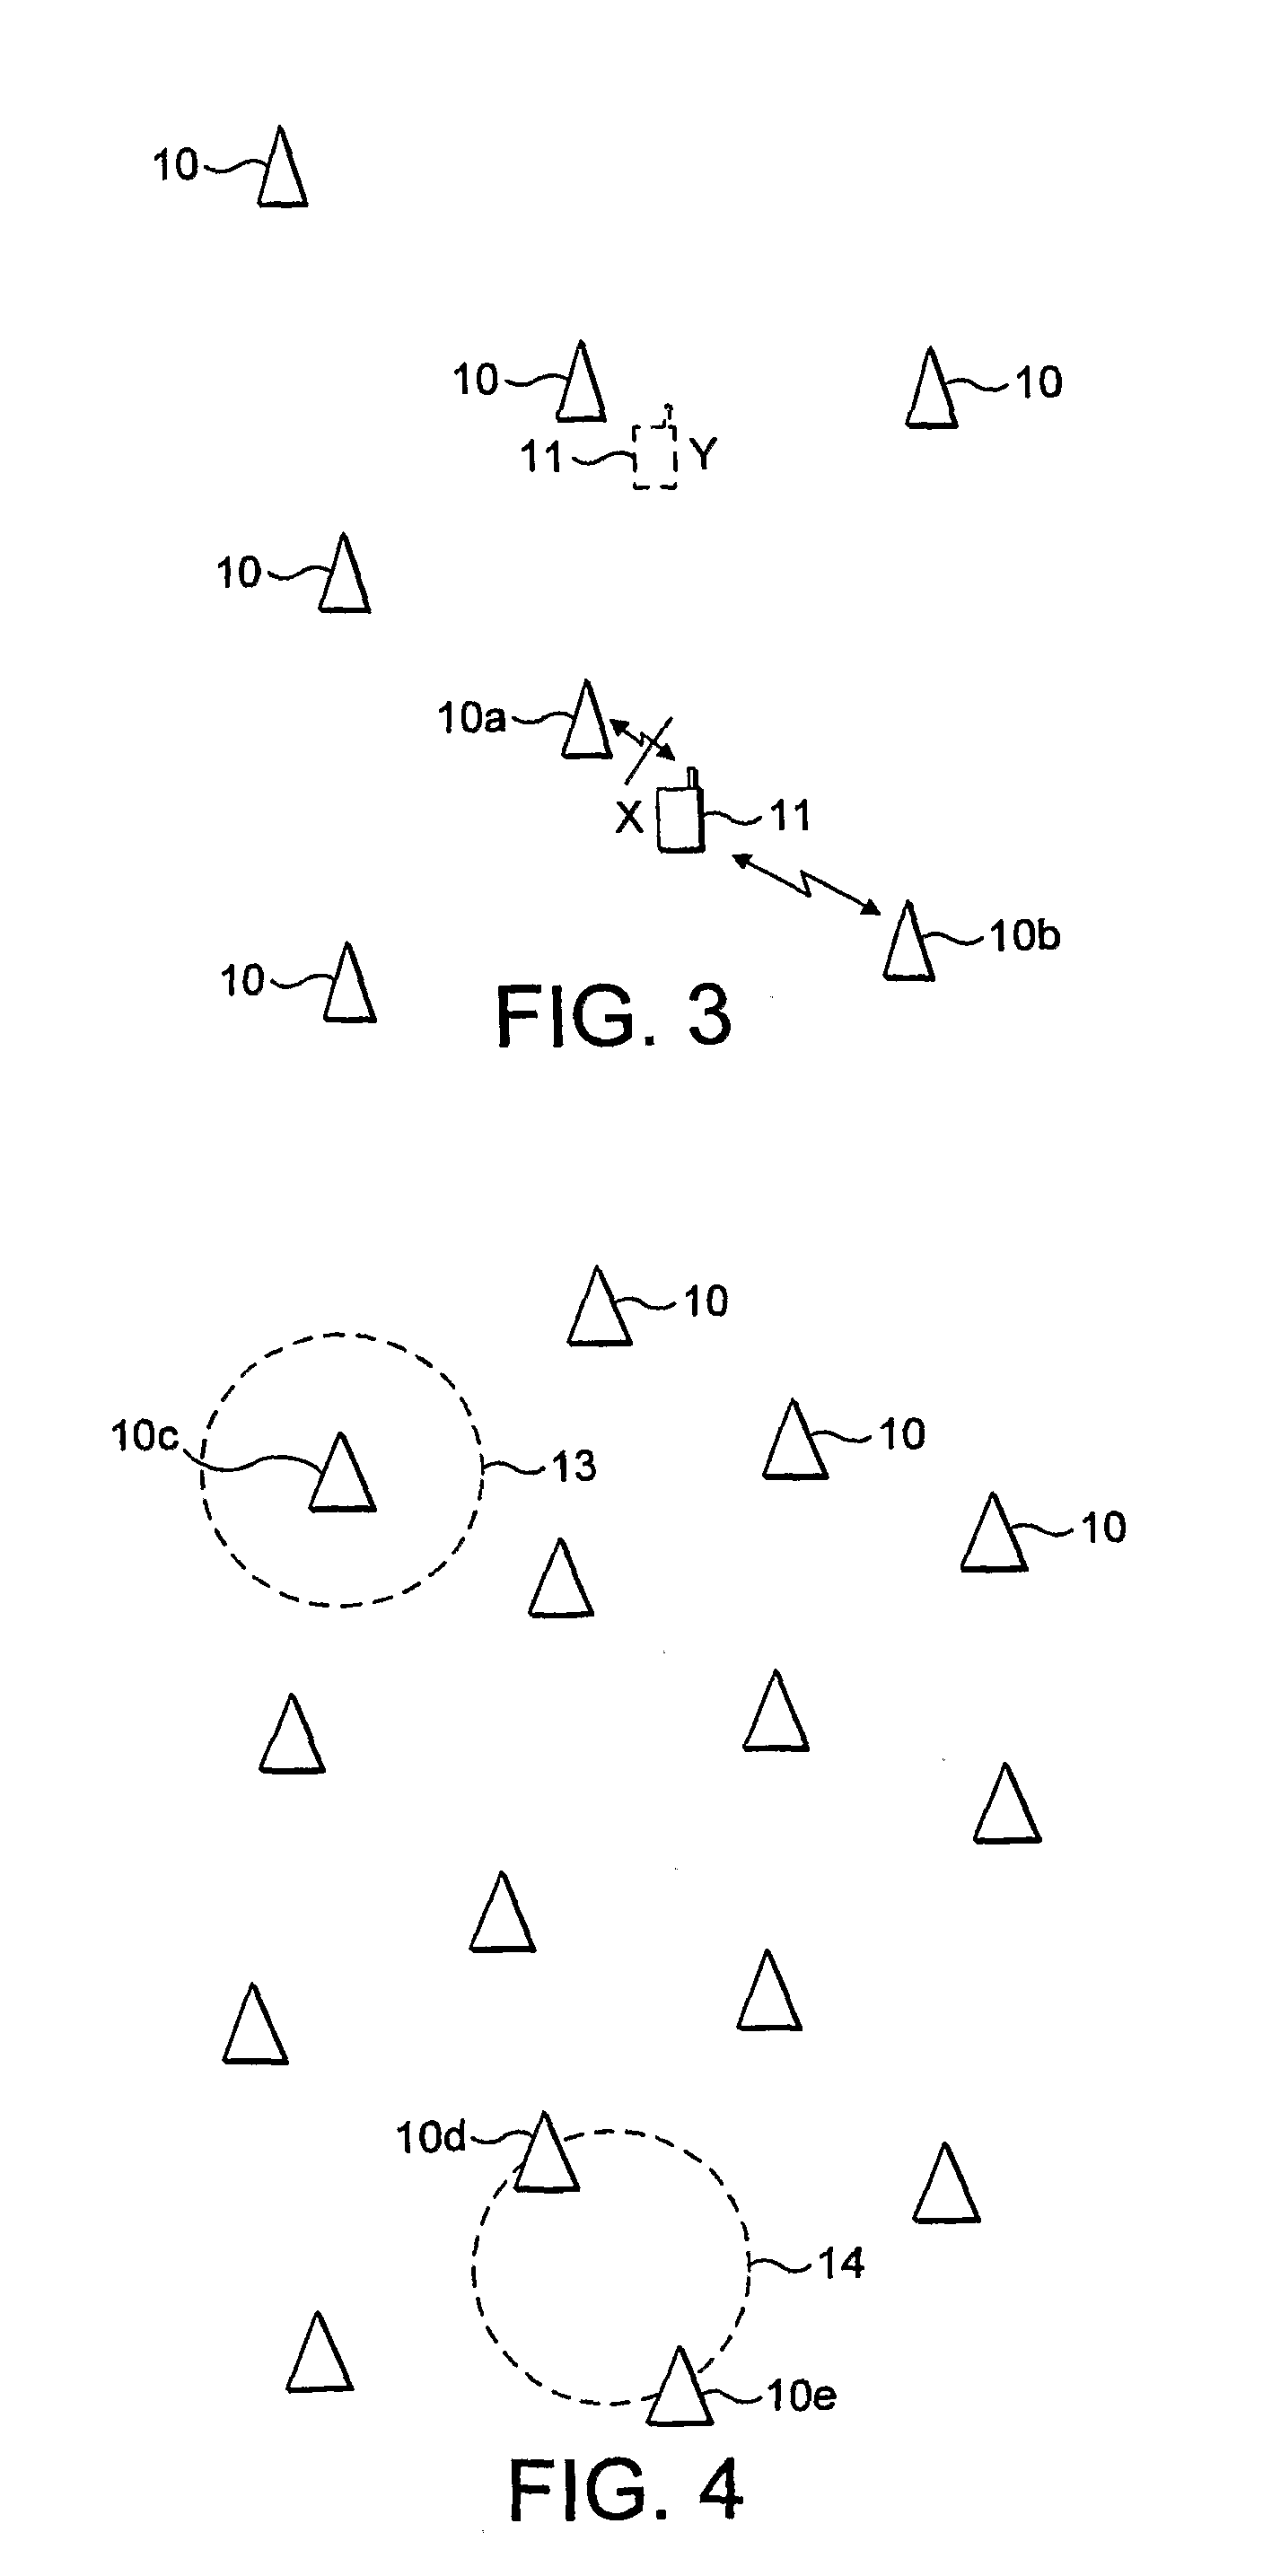 Method of Improving Coverage and Optimisation in Communication Networks